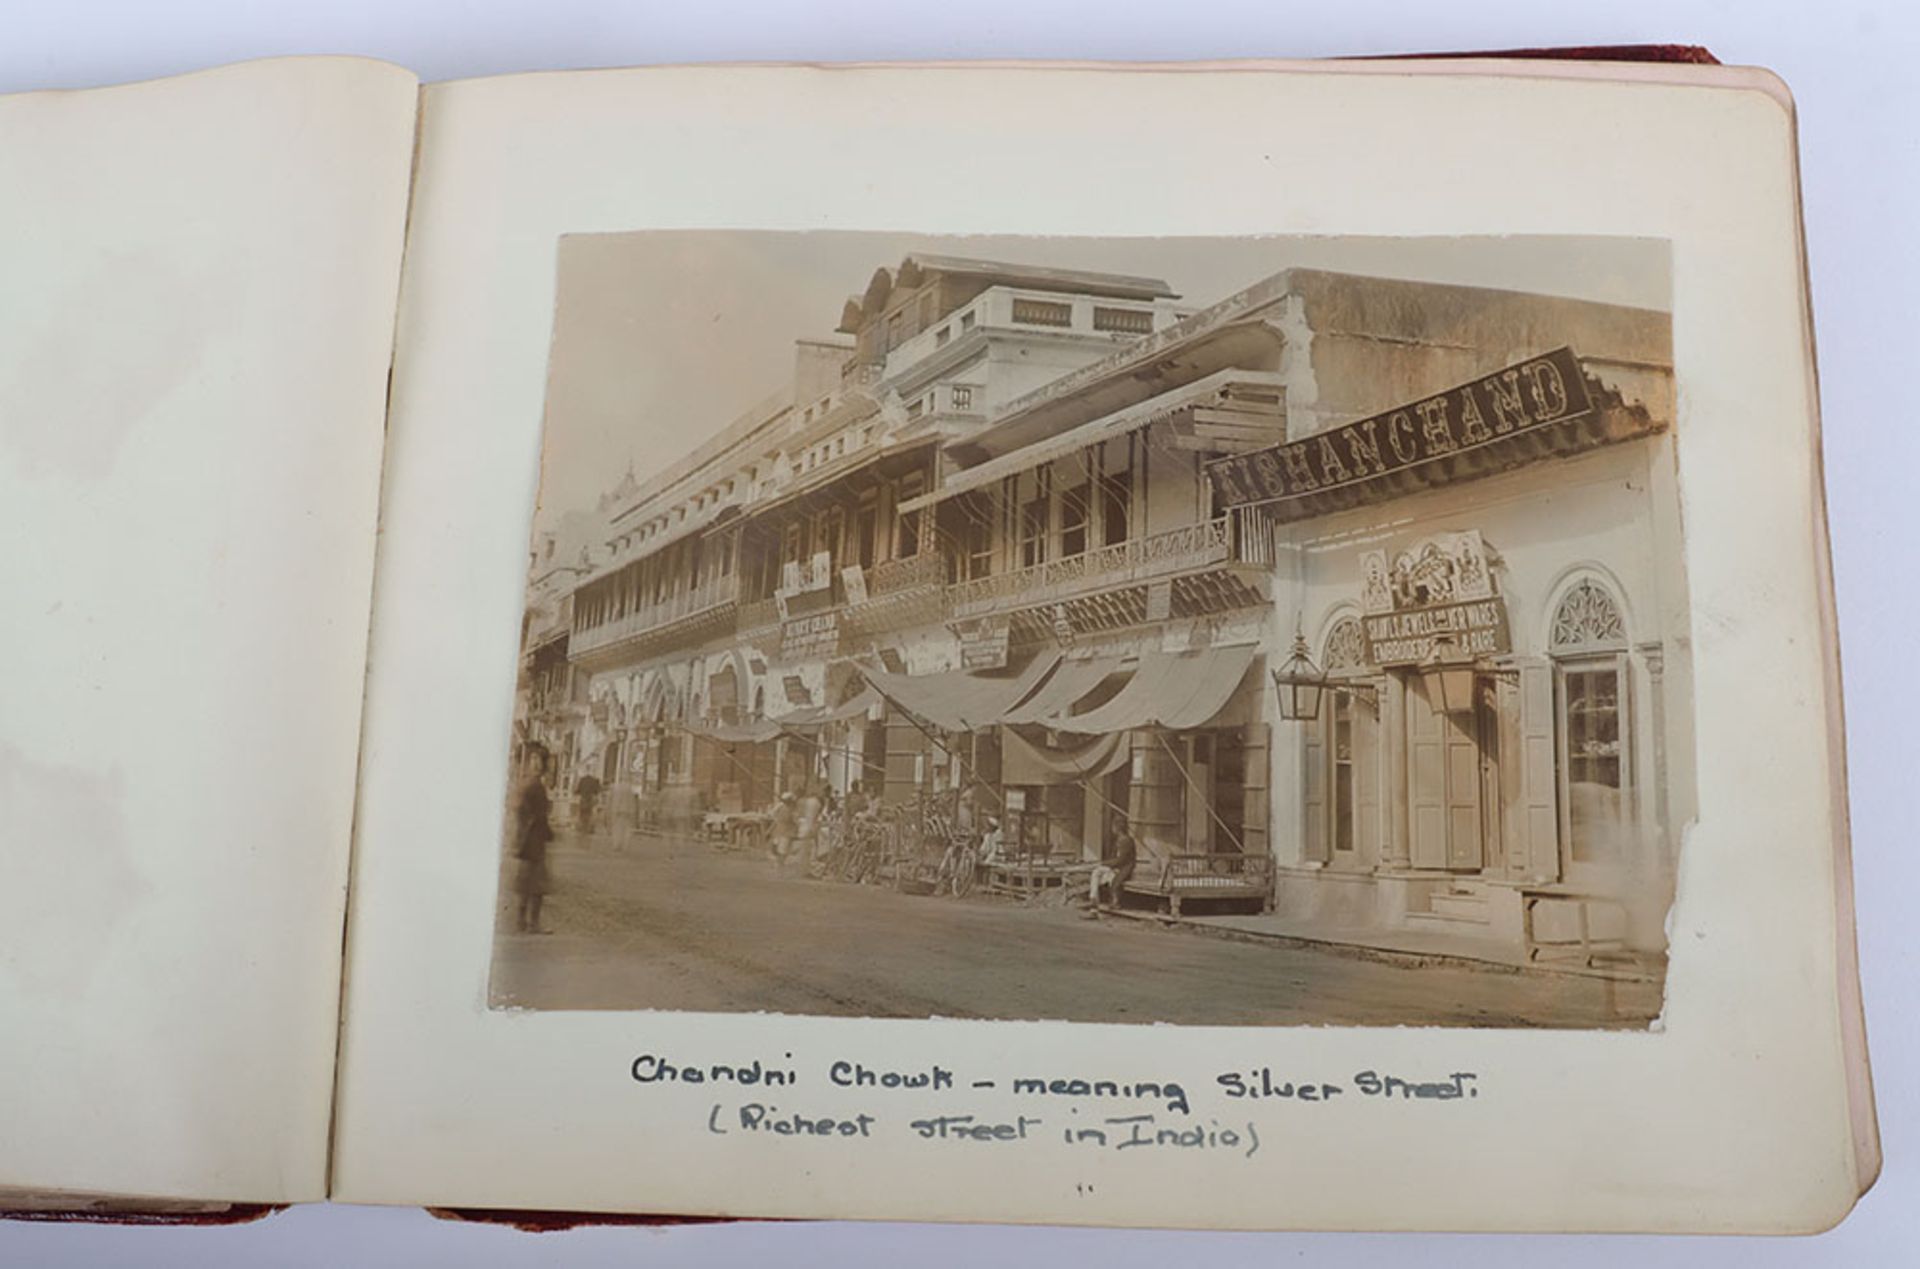 Photograph Album with images of ther Delhi Durbar, troops lining streets, Elephants, sacred cows bel - Image 22 of 48